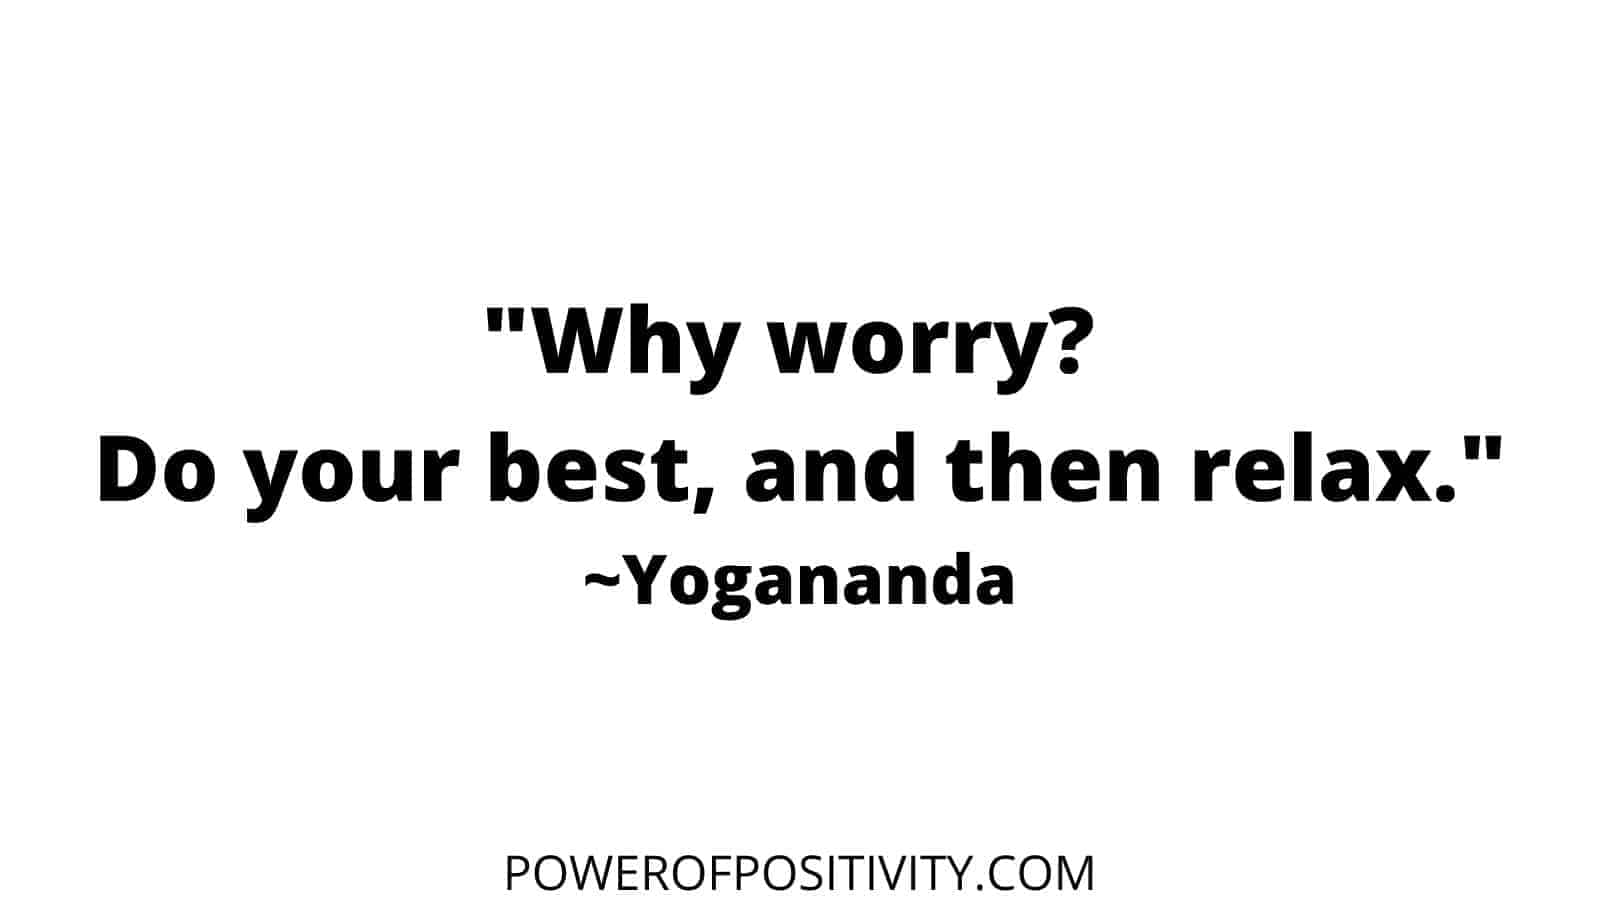 20 Quotes from Yogananda To Bring You Hope In Hard Times